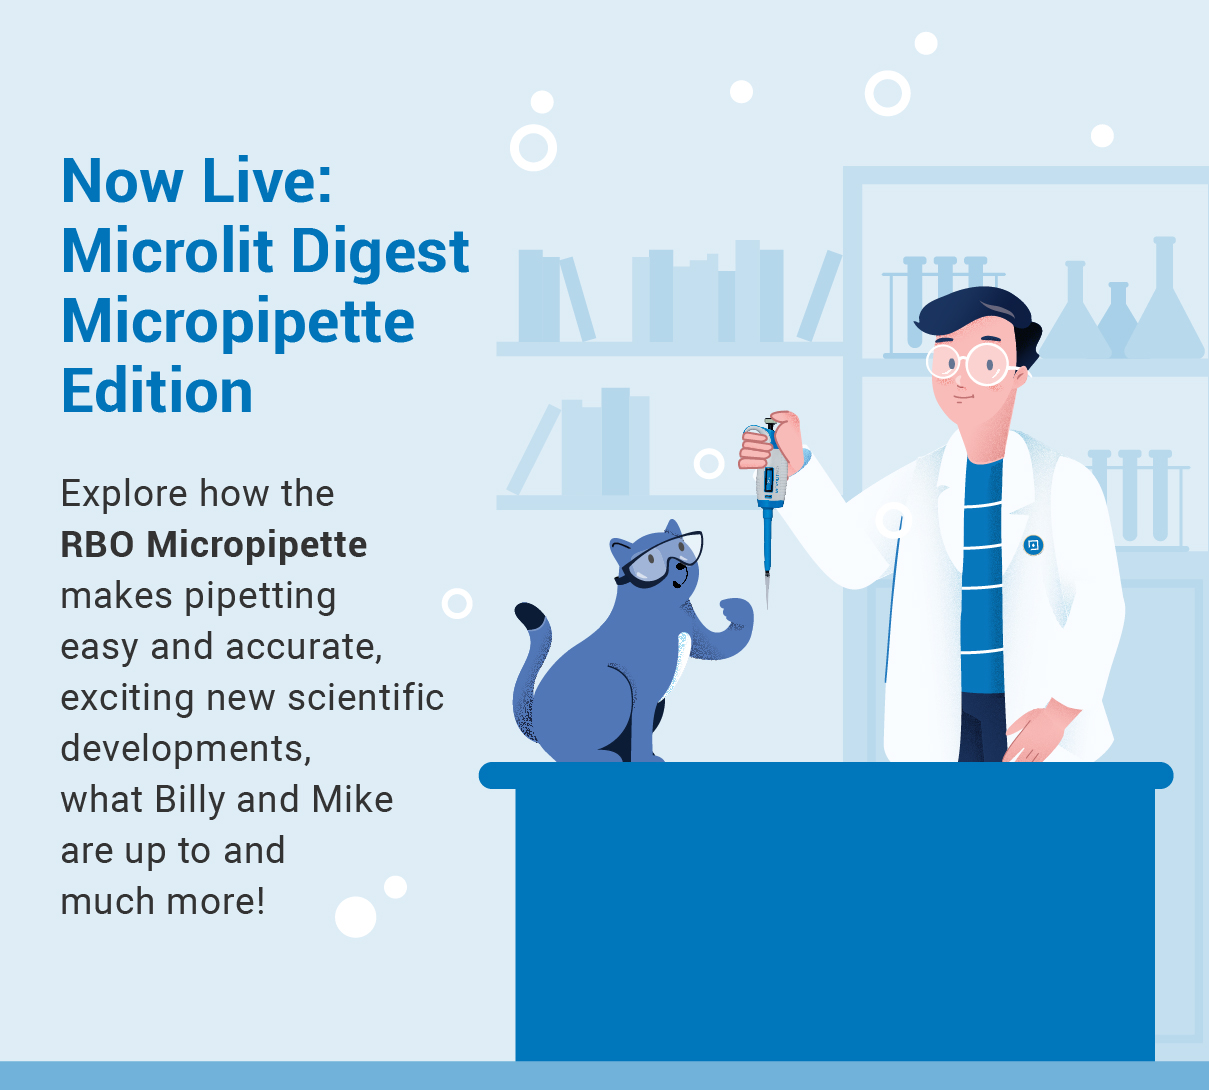 Ready to enjoy the latest edition of the Microlit Digest?